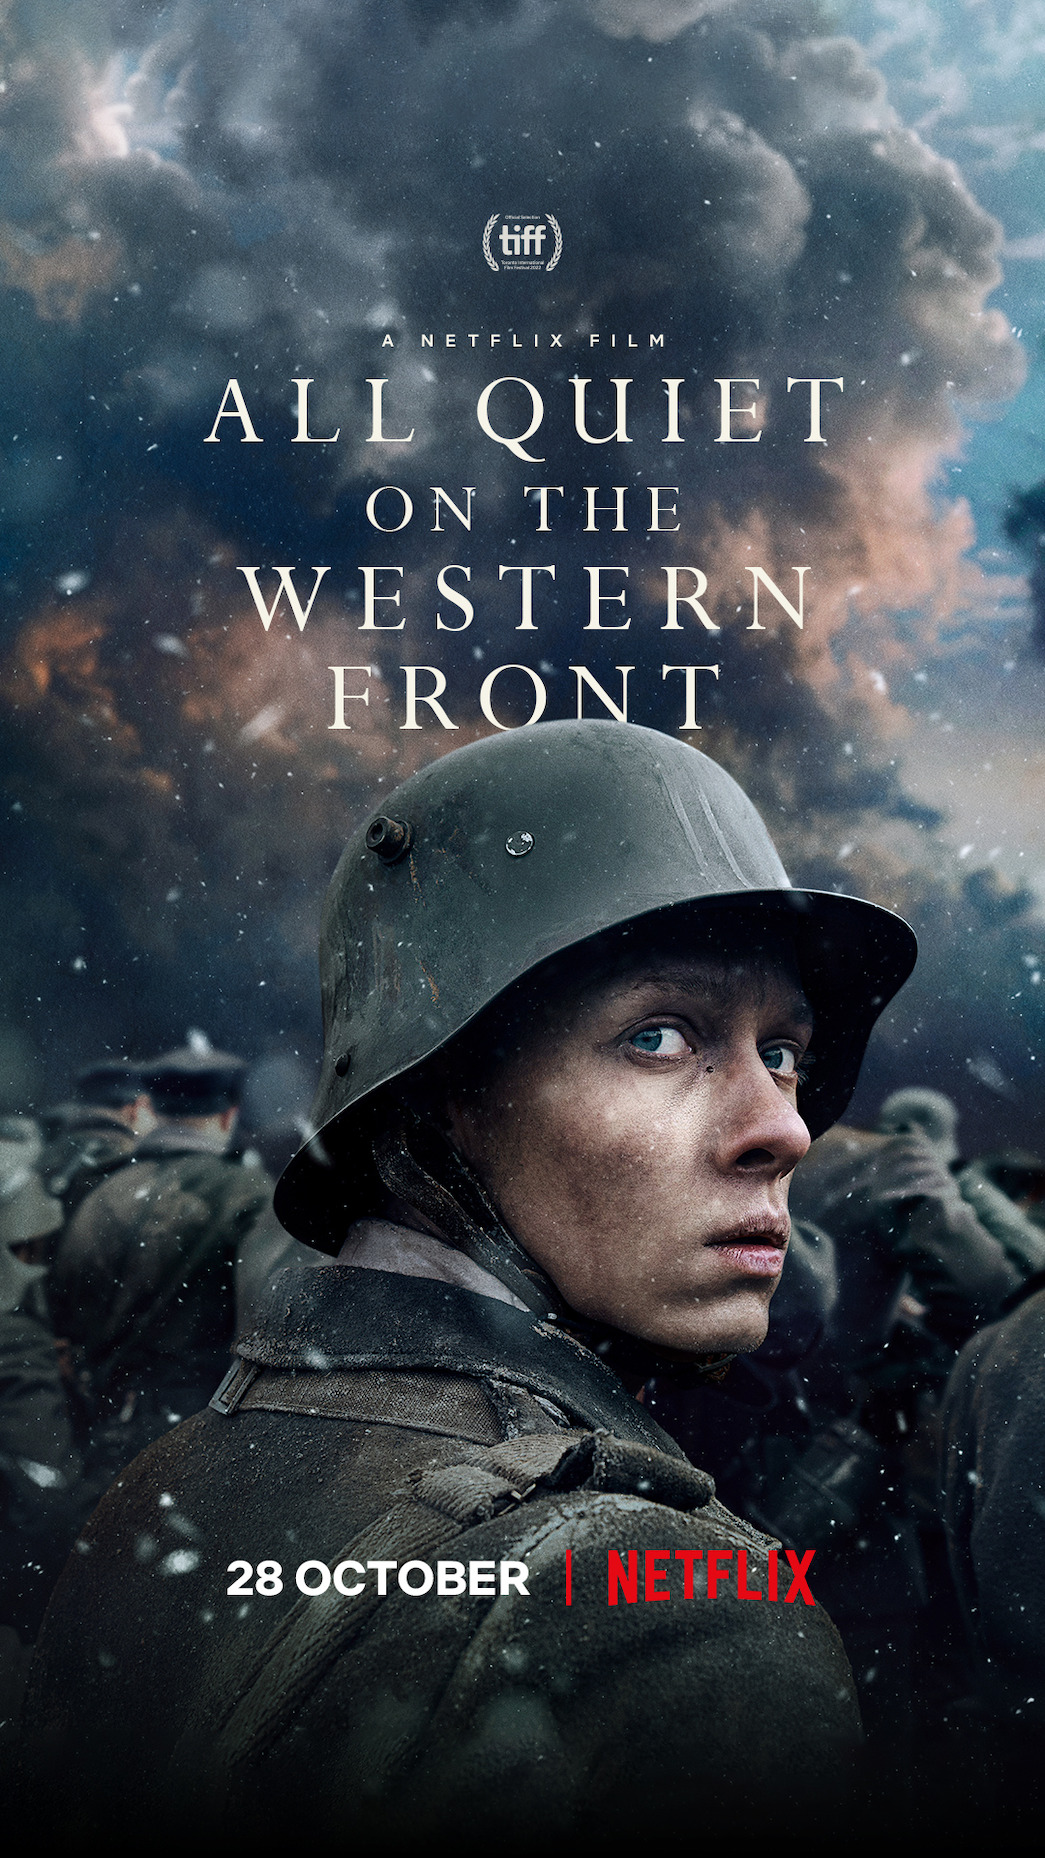 All Quiet On The Western Front Drops Release Date and Photo